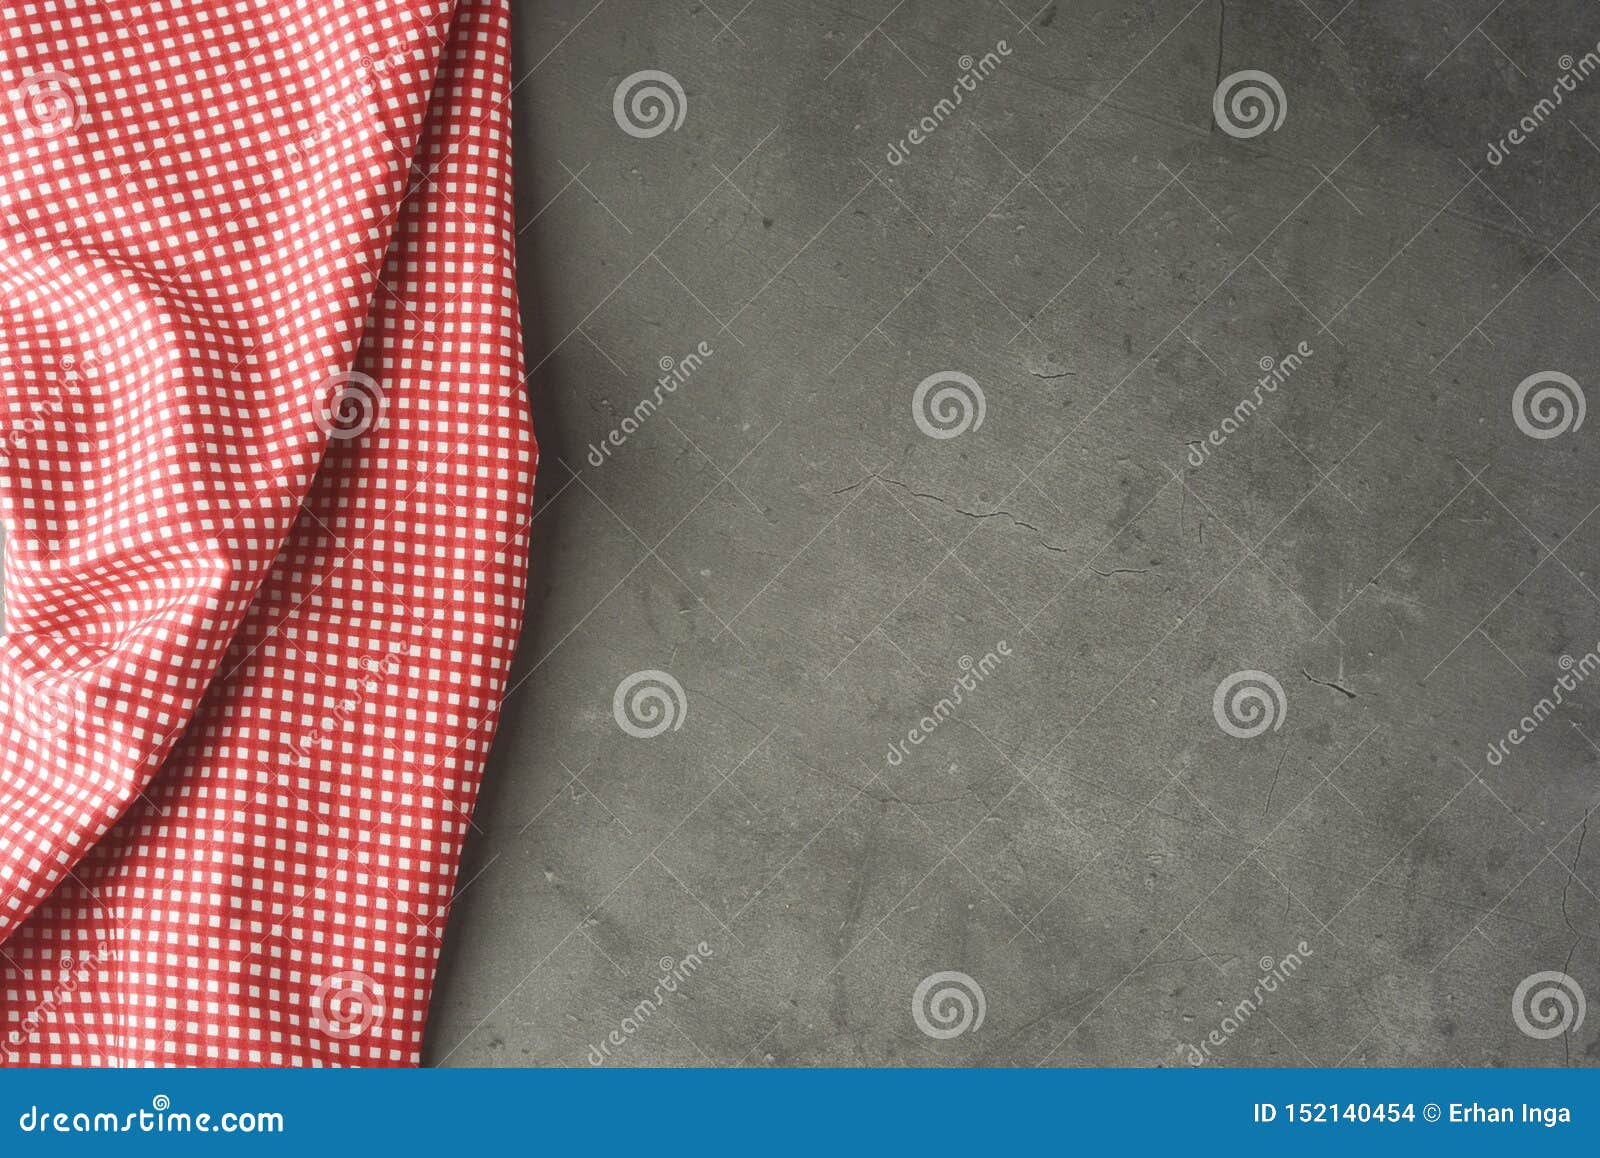 empty mockup for productor food or text. textured grey board with red fabric